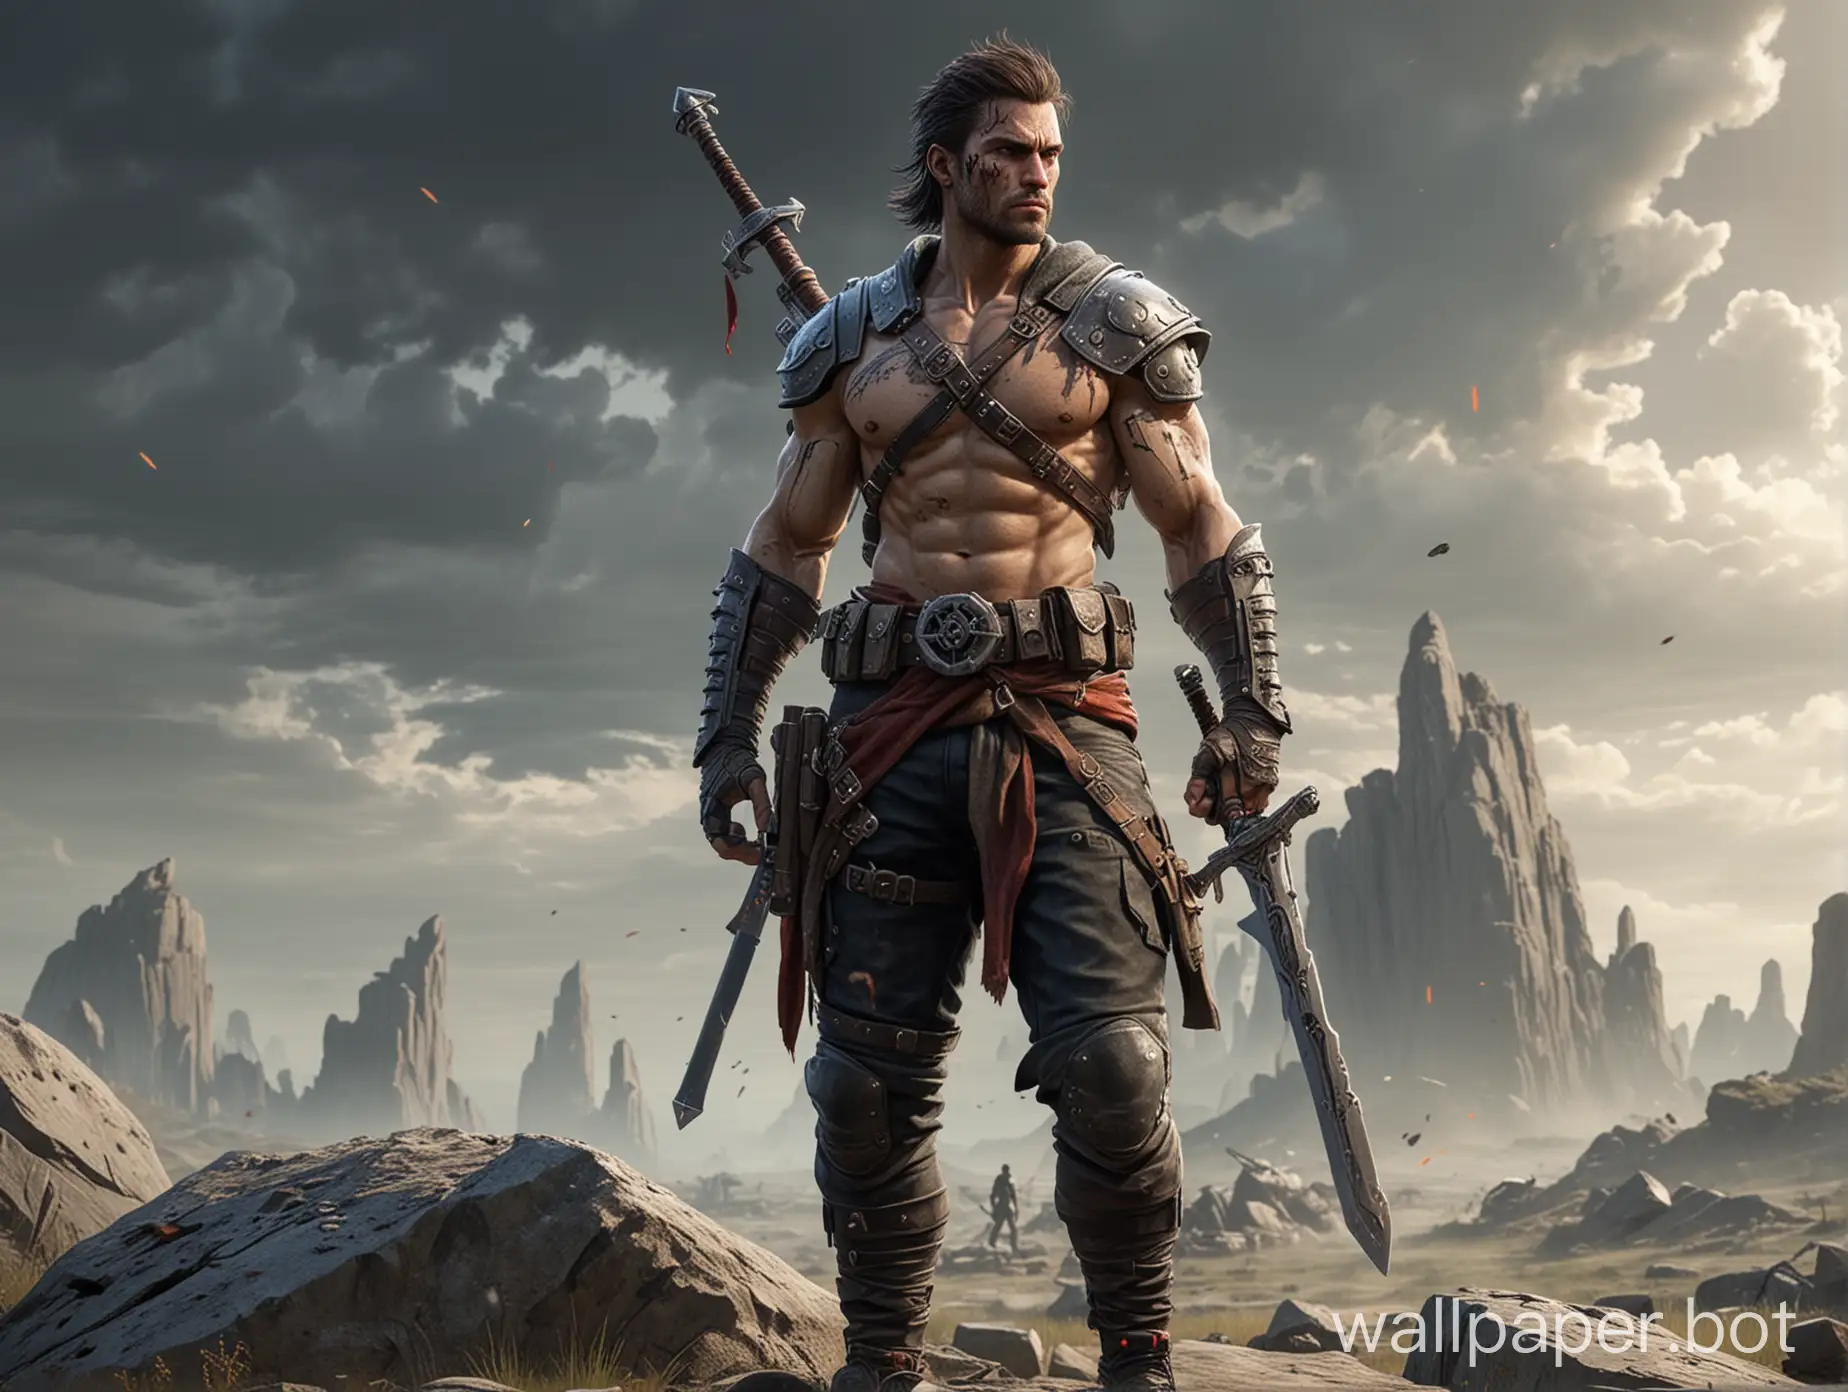 Make a character who is a biker and a gamer which has a small scar on his face and has a fit body. He hold a sword in his right hand and a gun his left hand. He is standing on a big rock and looking on a battlefield for war.